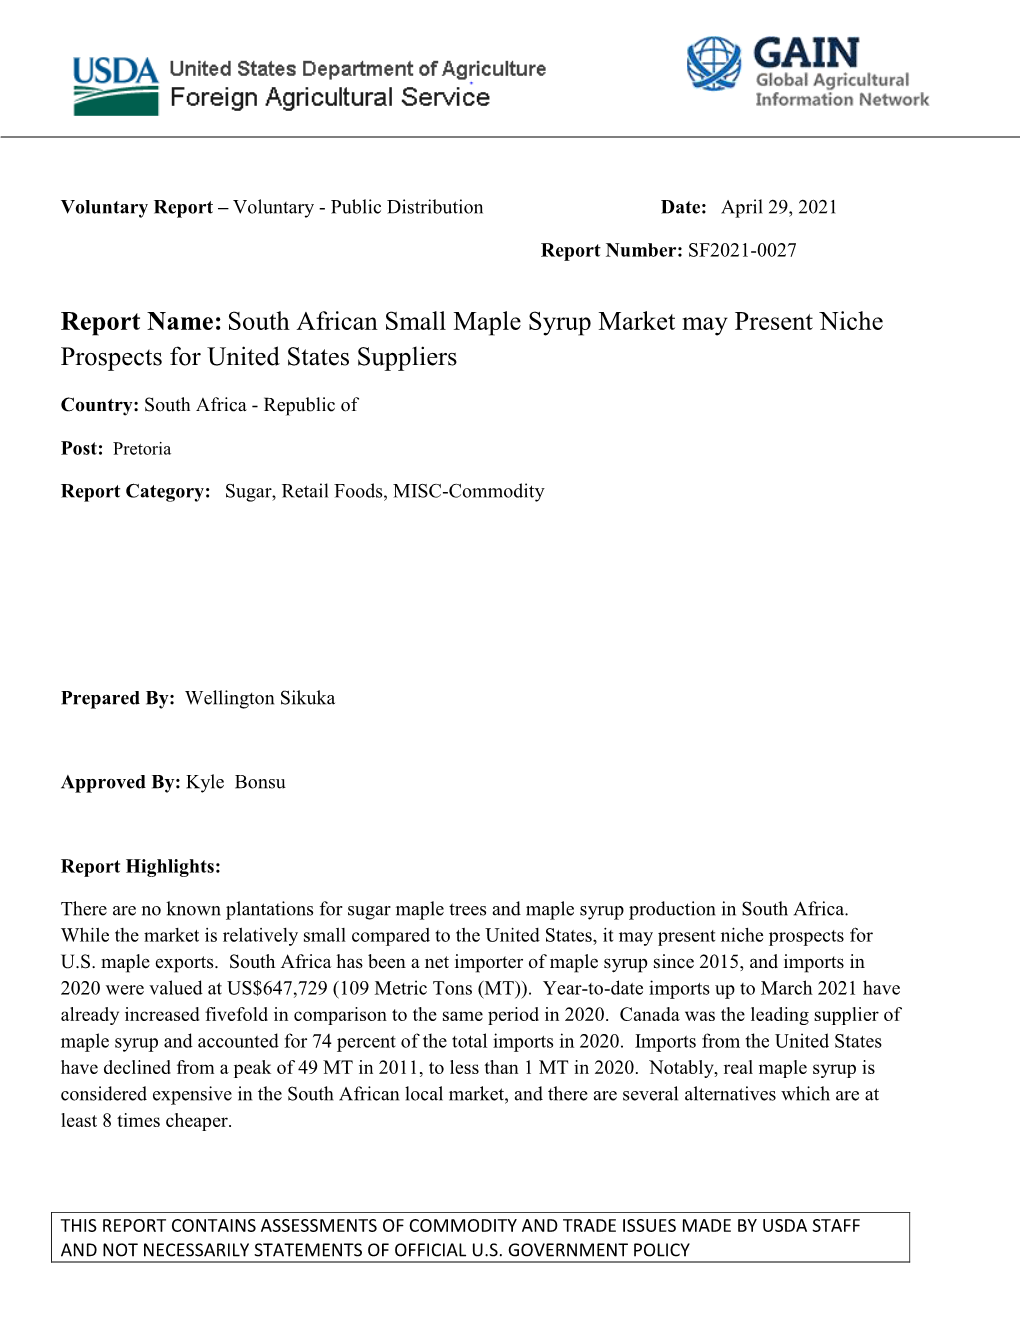 Report Name:South African Small Maple Syrup Market May Present